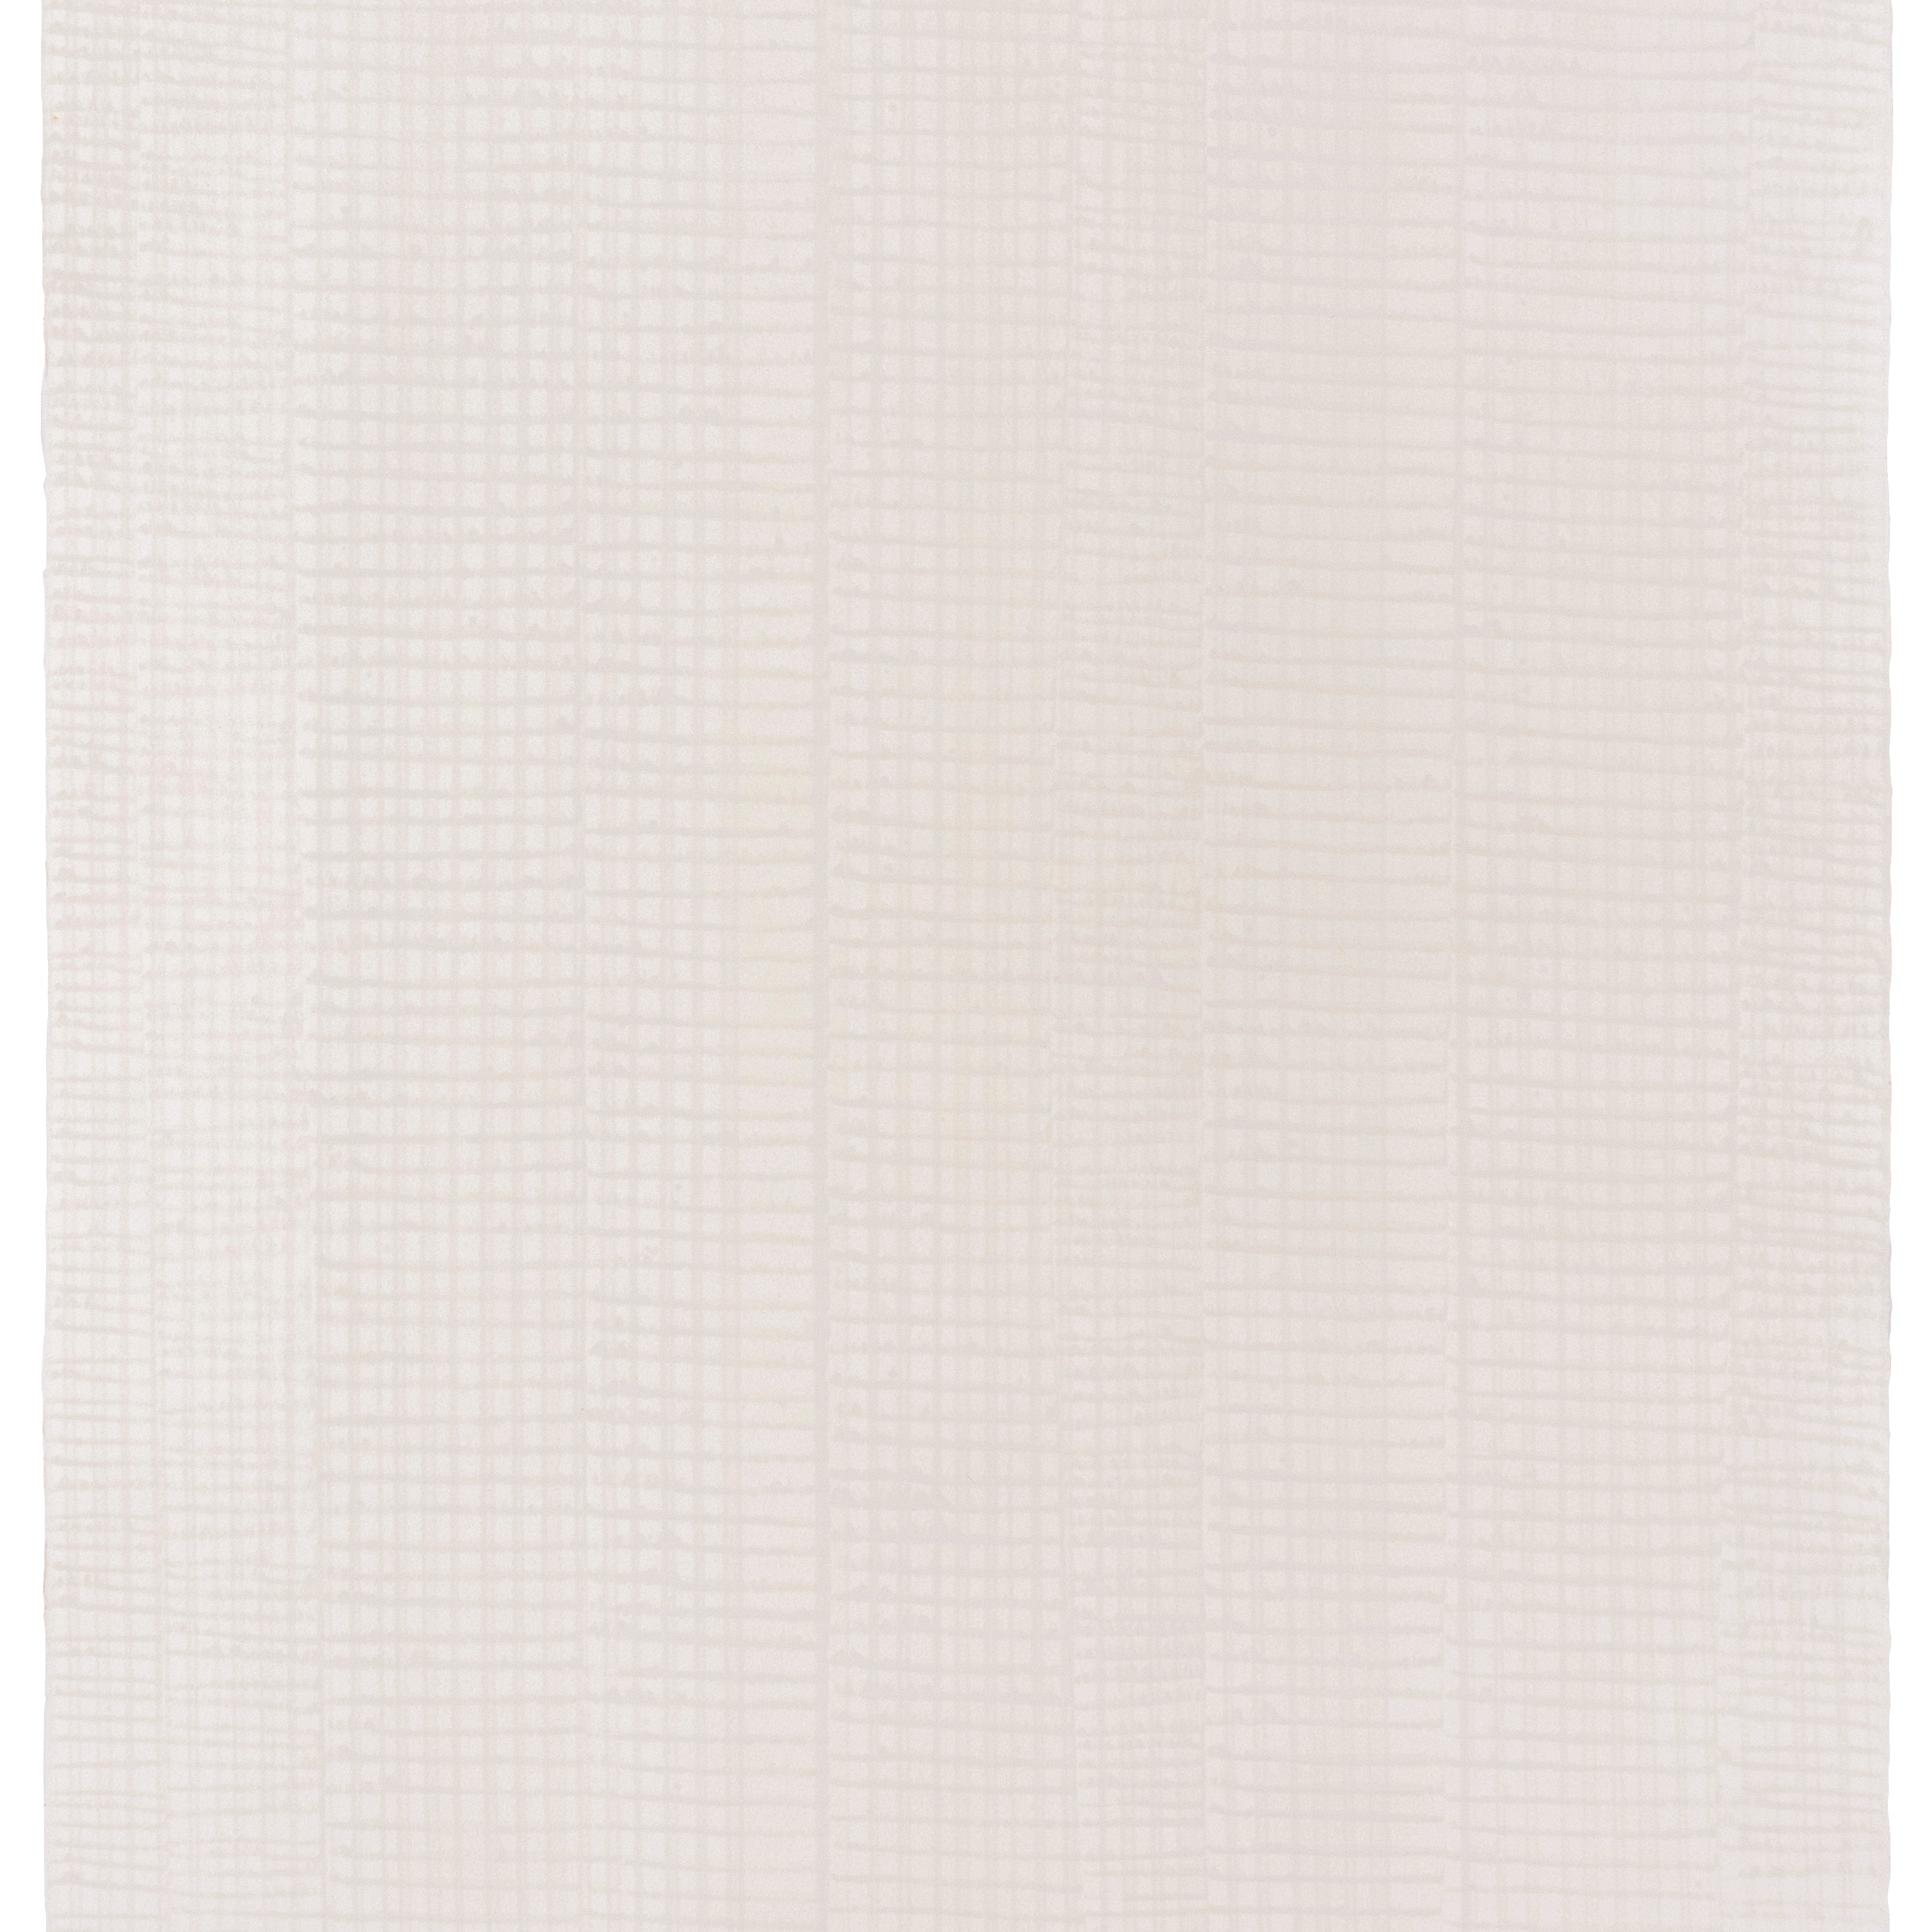 Sheet of hand-painted wallpaper with an irregular grid pattern in beige on a cream field.